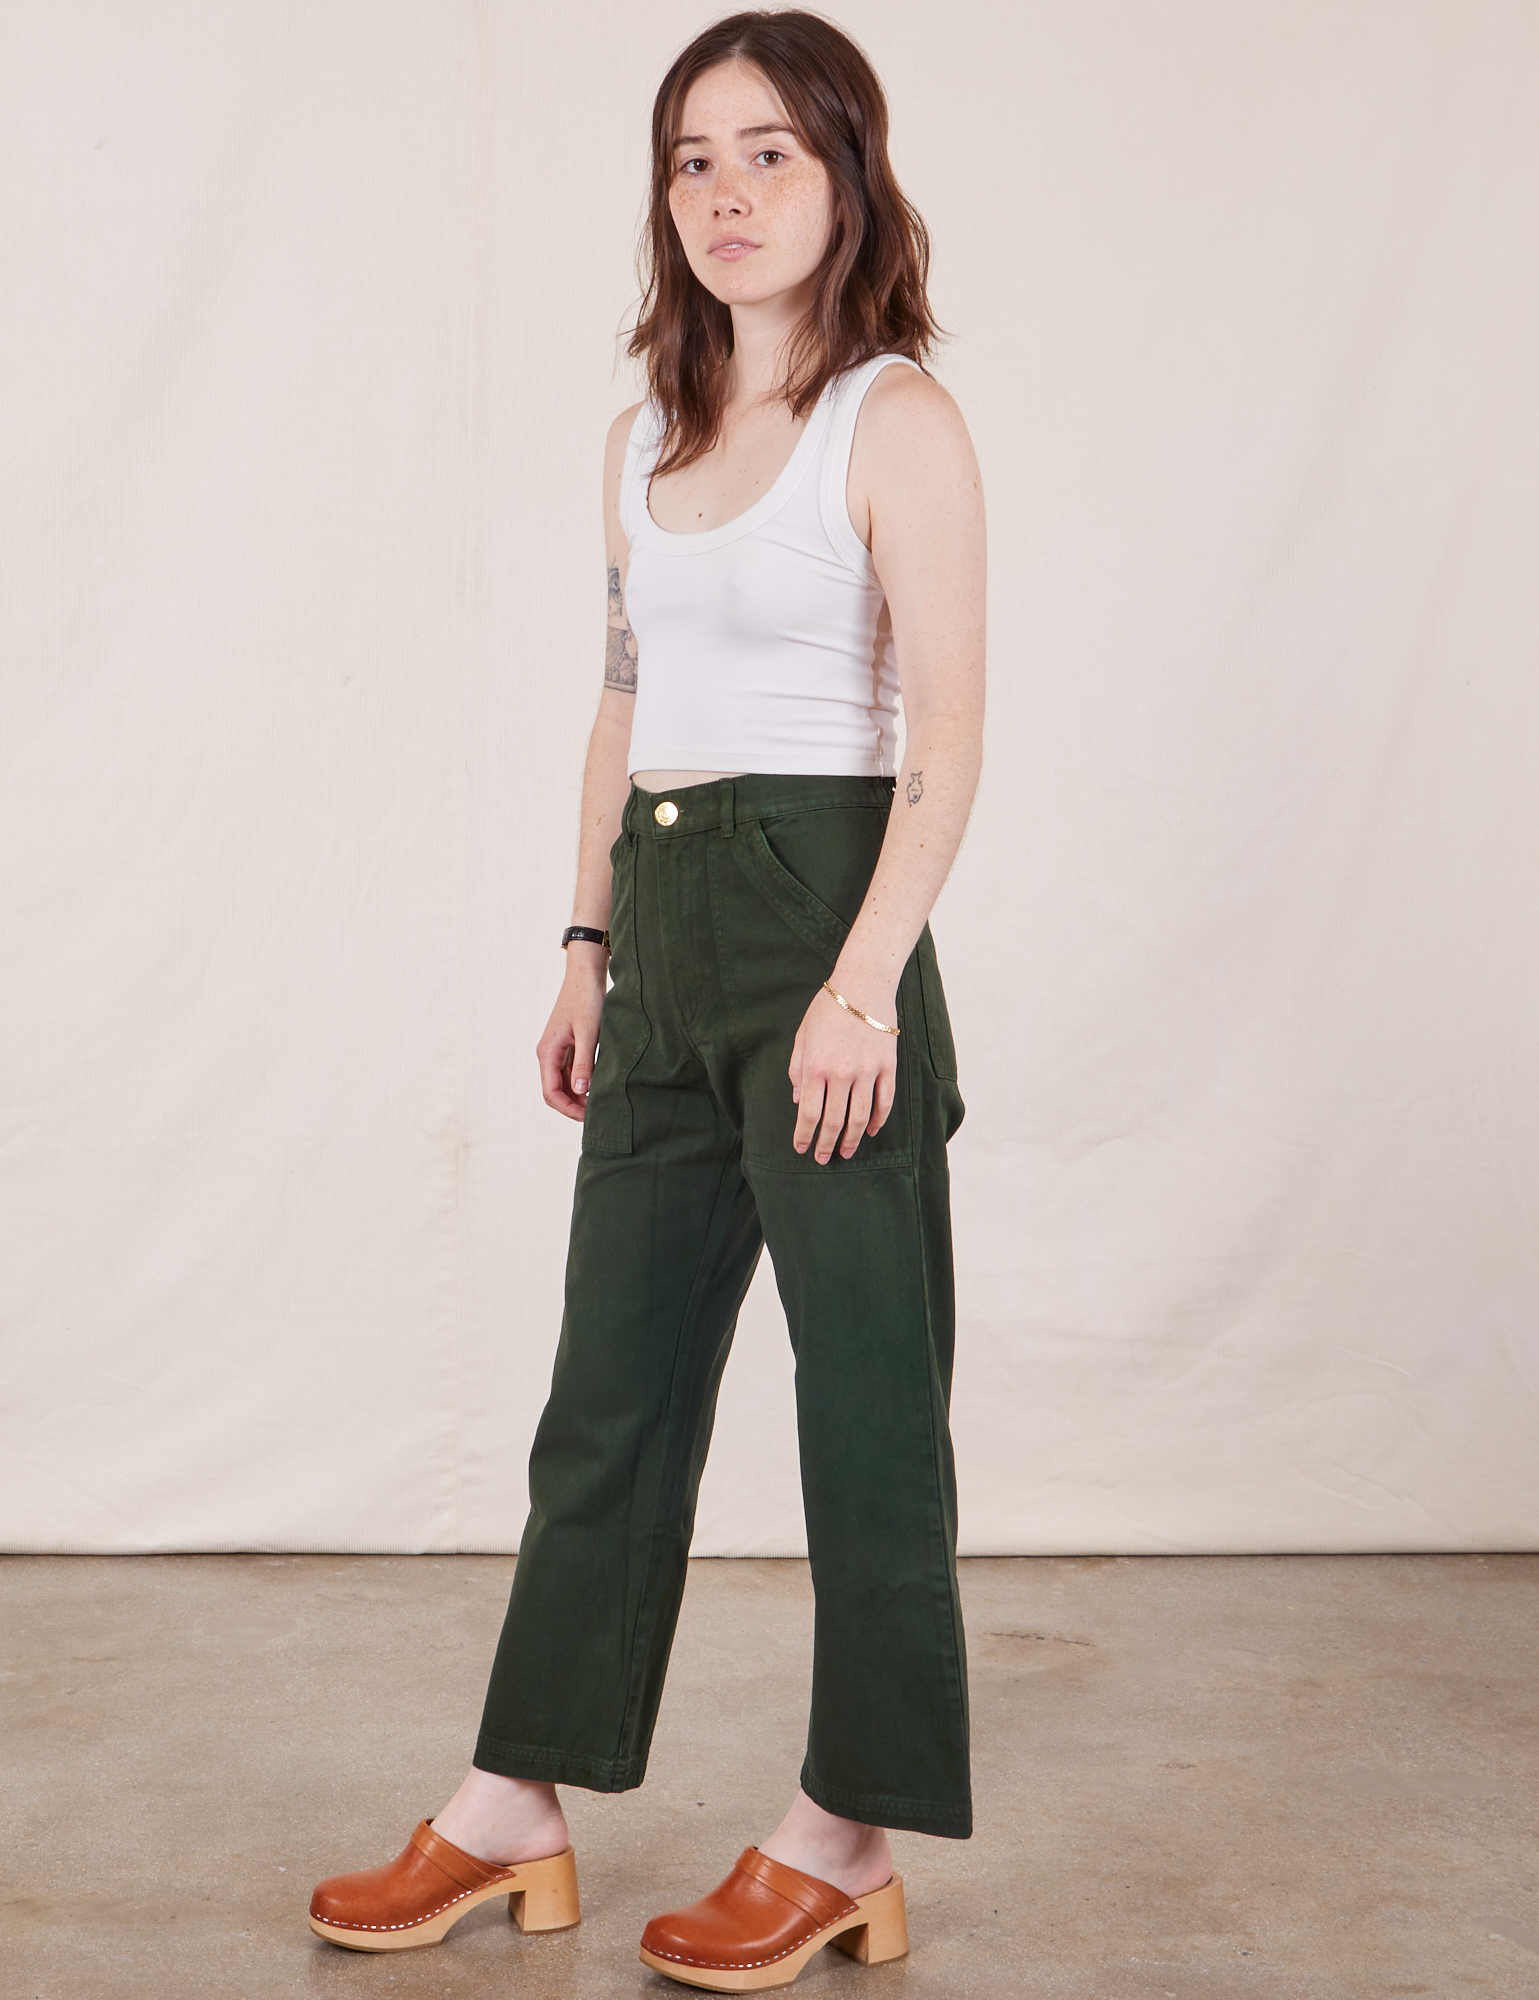 Angled view of Petite Work Pants in Swamp Green and Cropped Tank Top in vintage tee off-white on Hana